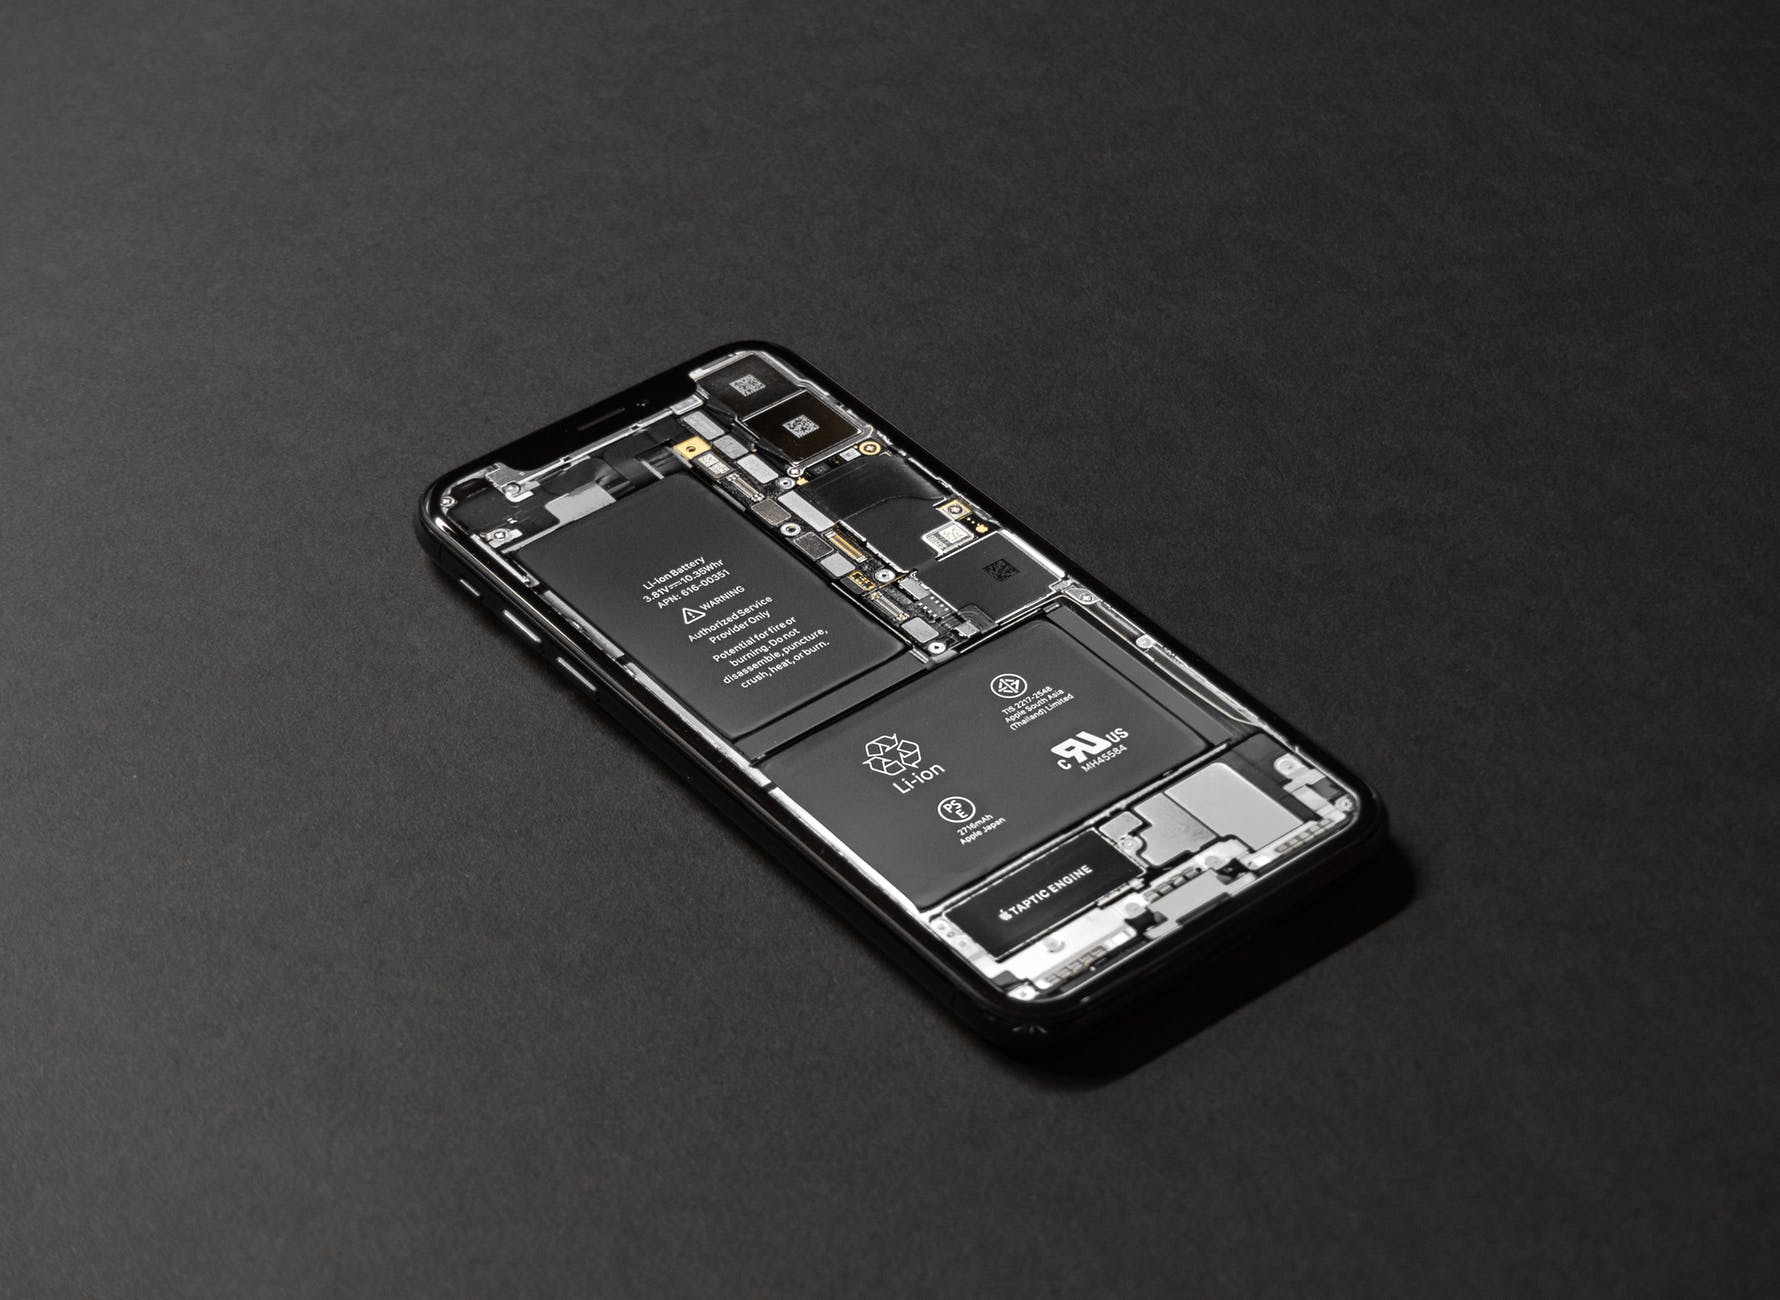 How to check your iPhone’s battery health